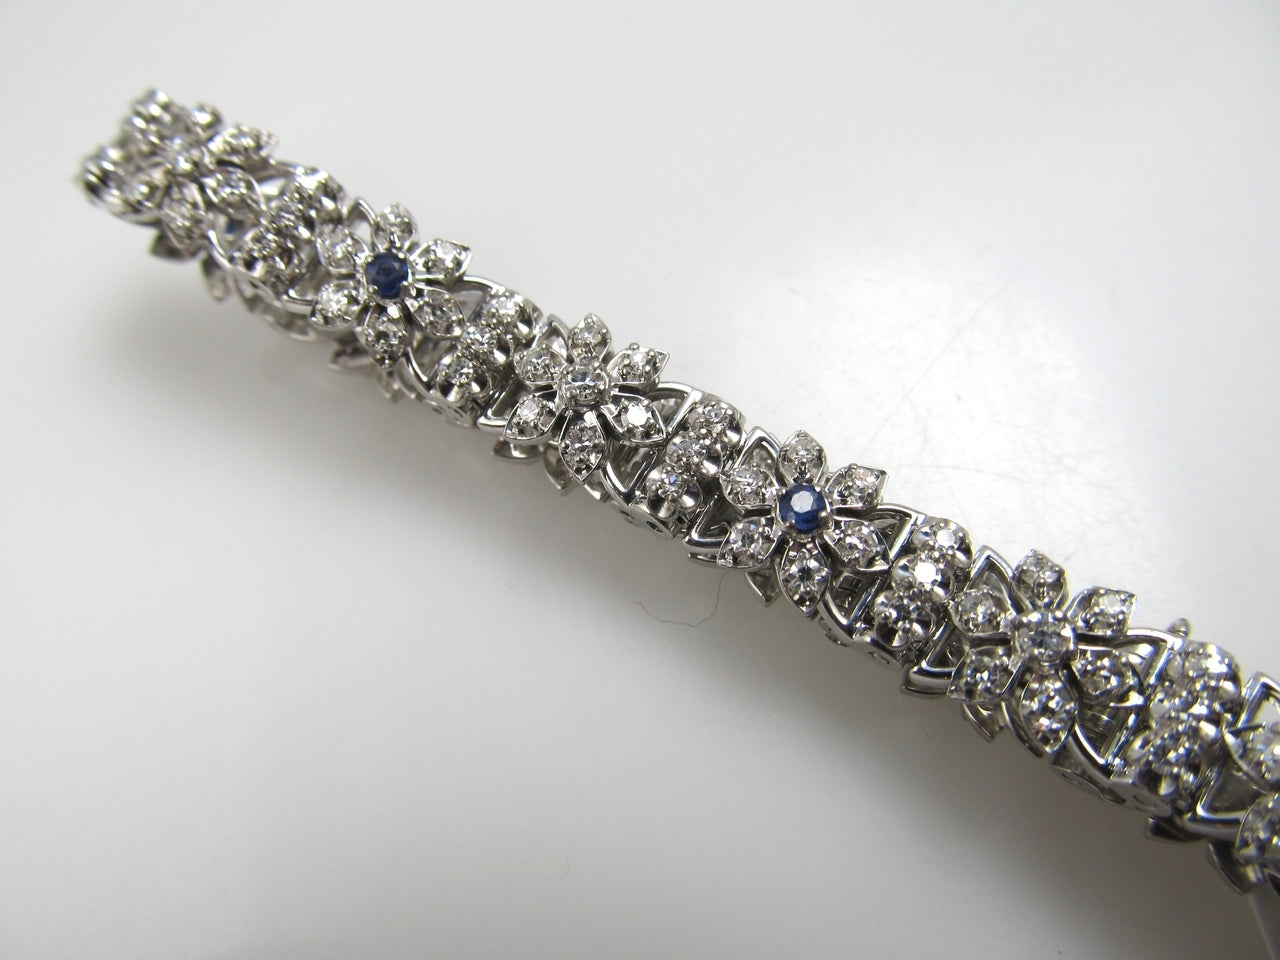 Jabel 18k White Gold Bracelet With 1.25cts In Diamonds, Sapphires. Circa 1940